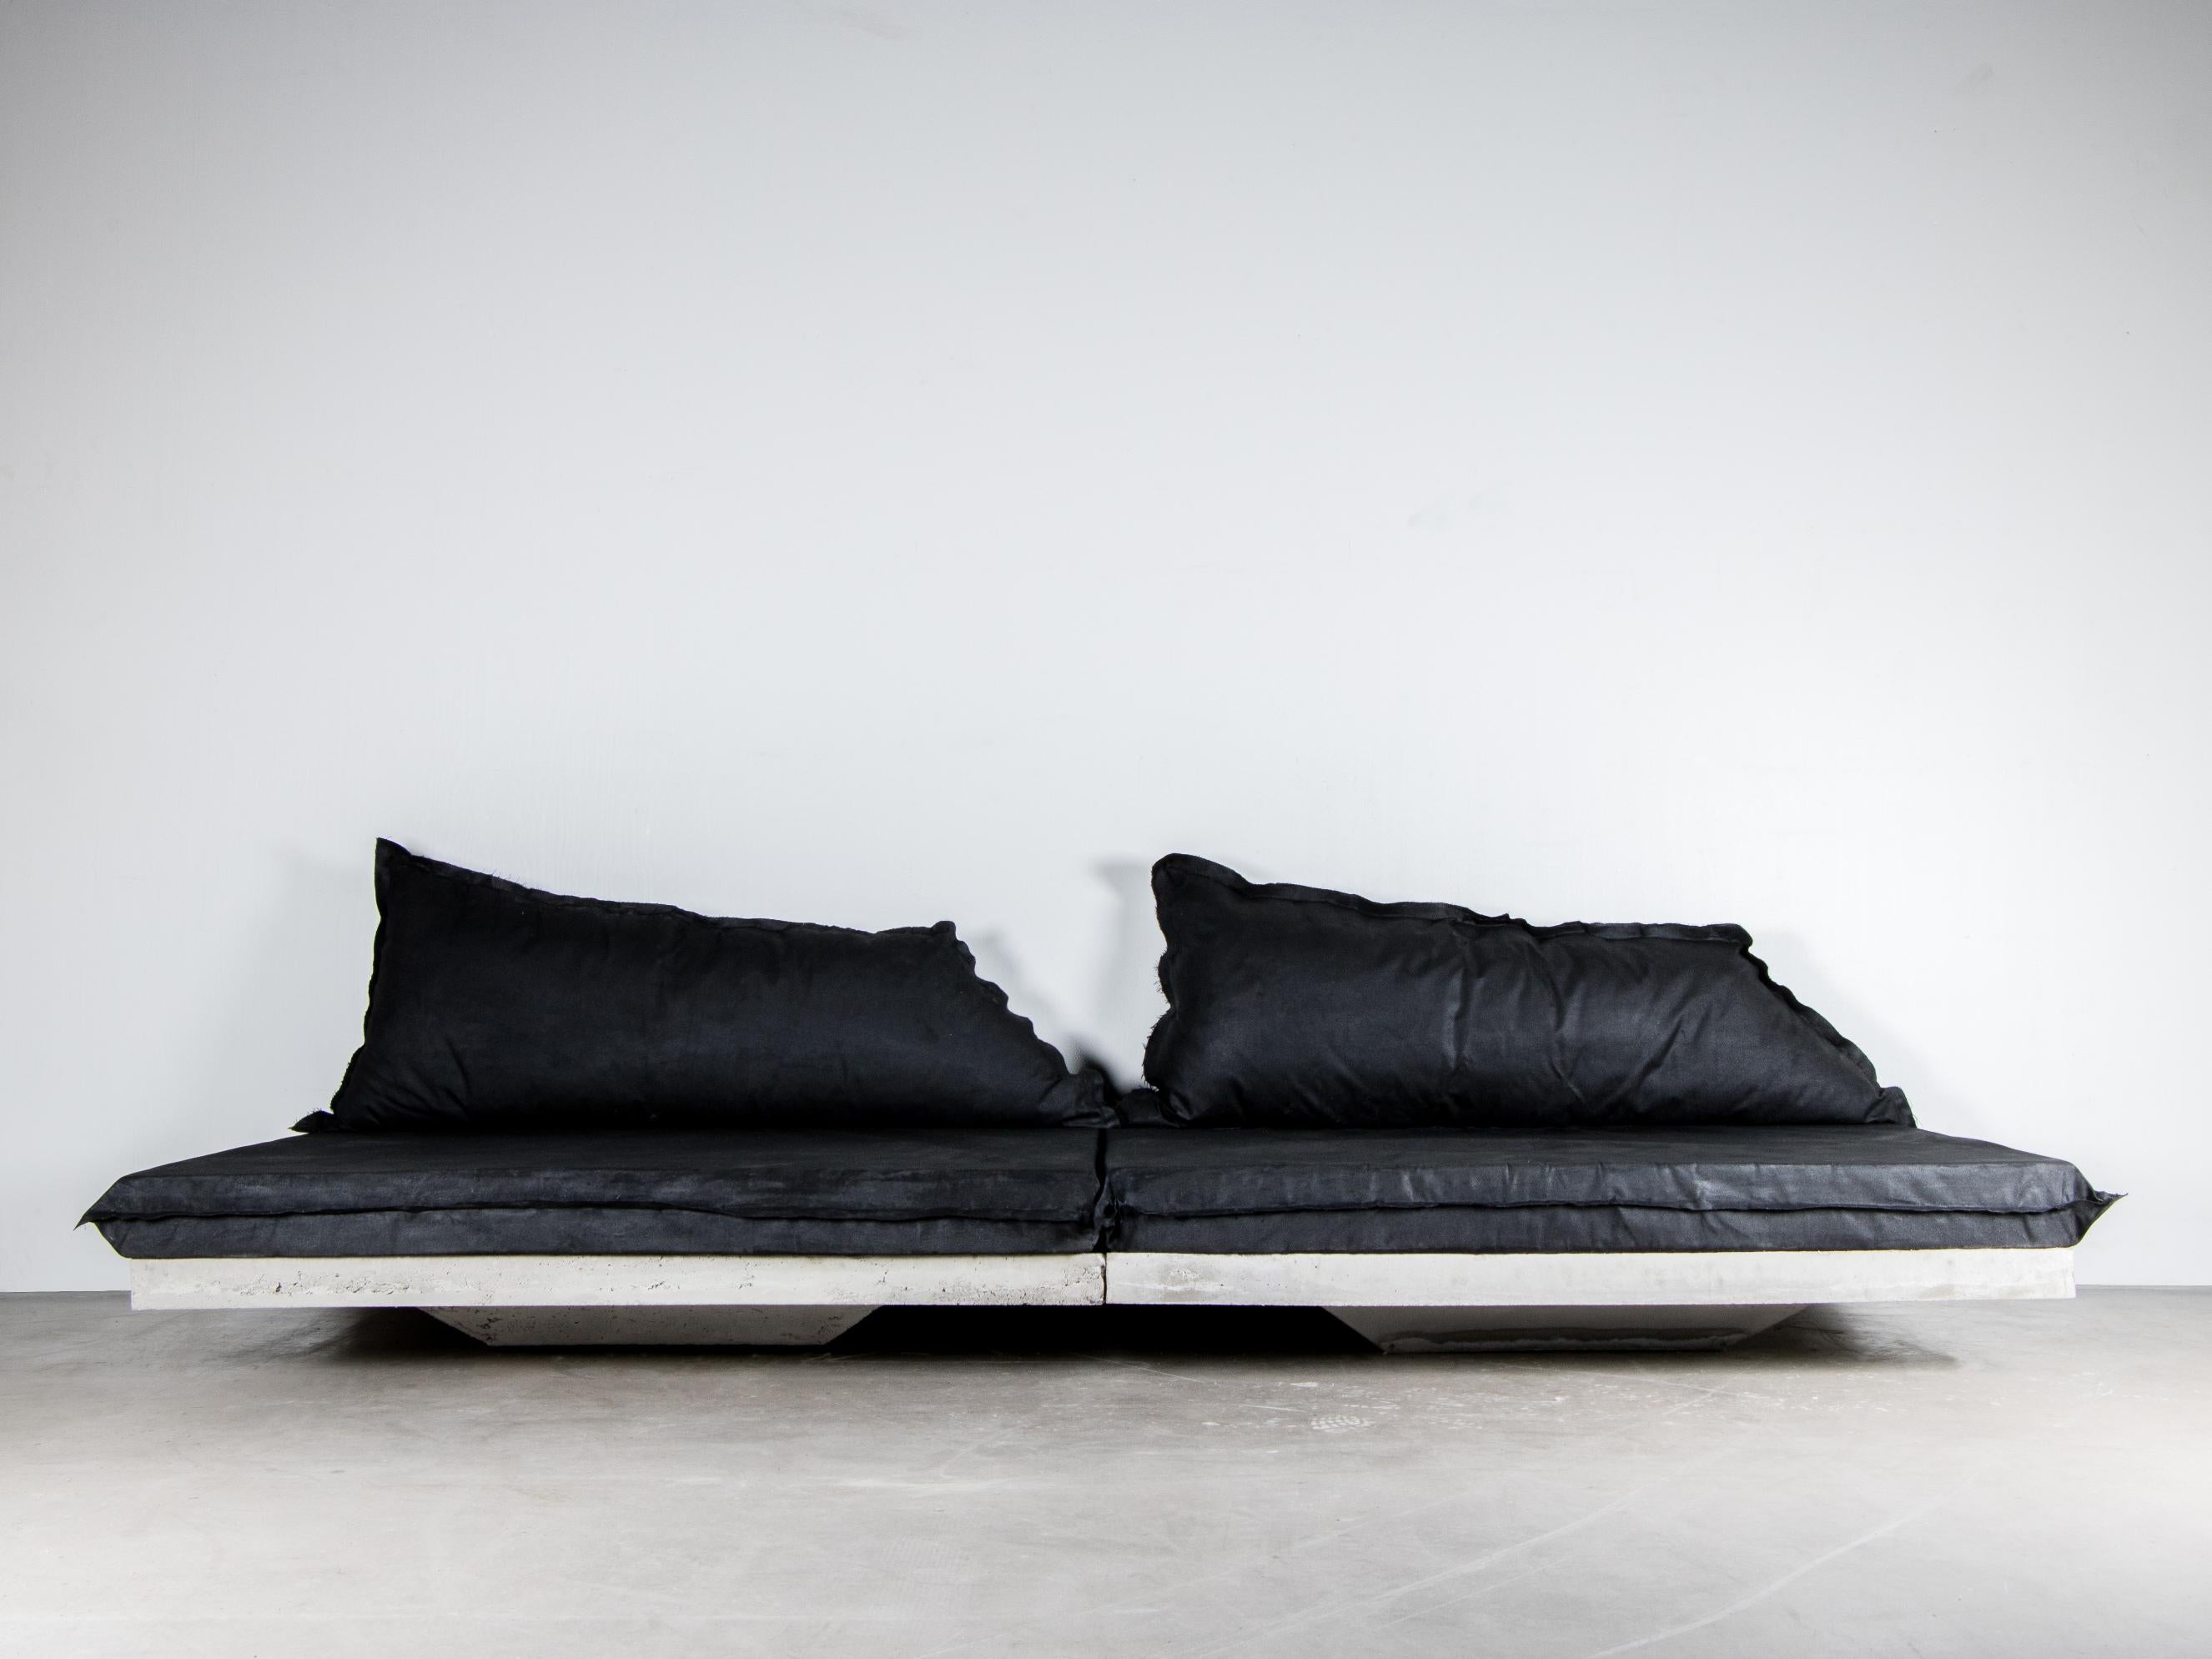 SVÄV sofa by Lucas Morten
2021
Limited edition of 19
Price per 2 modules
Module dimensions: H 32, D 110, W 140 cm
Module weight: 100 kg.
Material: concrete and hand-waxed upholstered cushion.


A floating concrete raft - an illusion or an